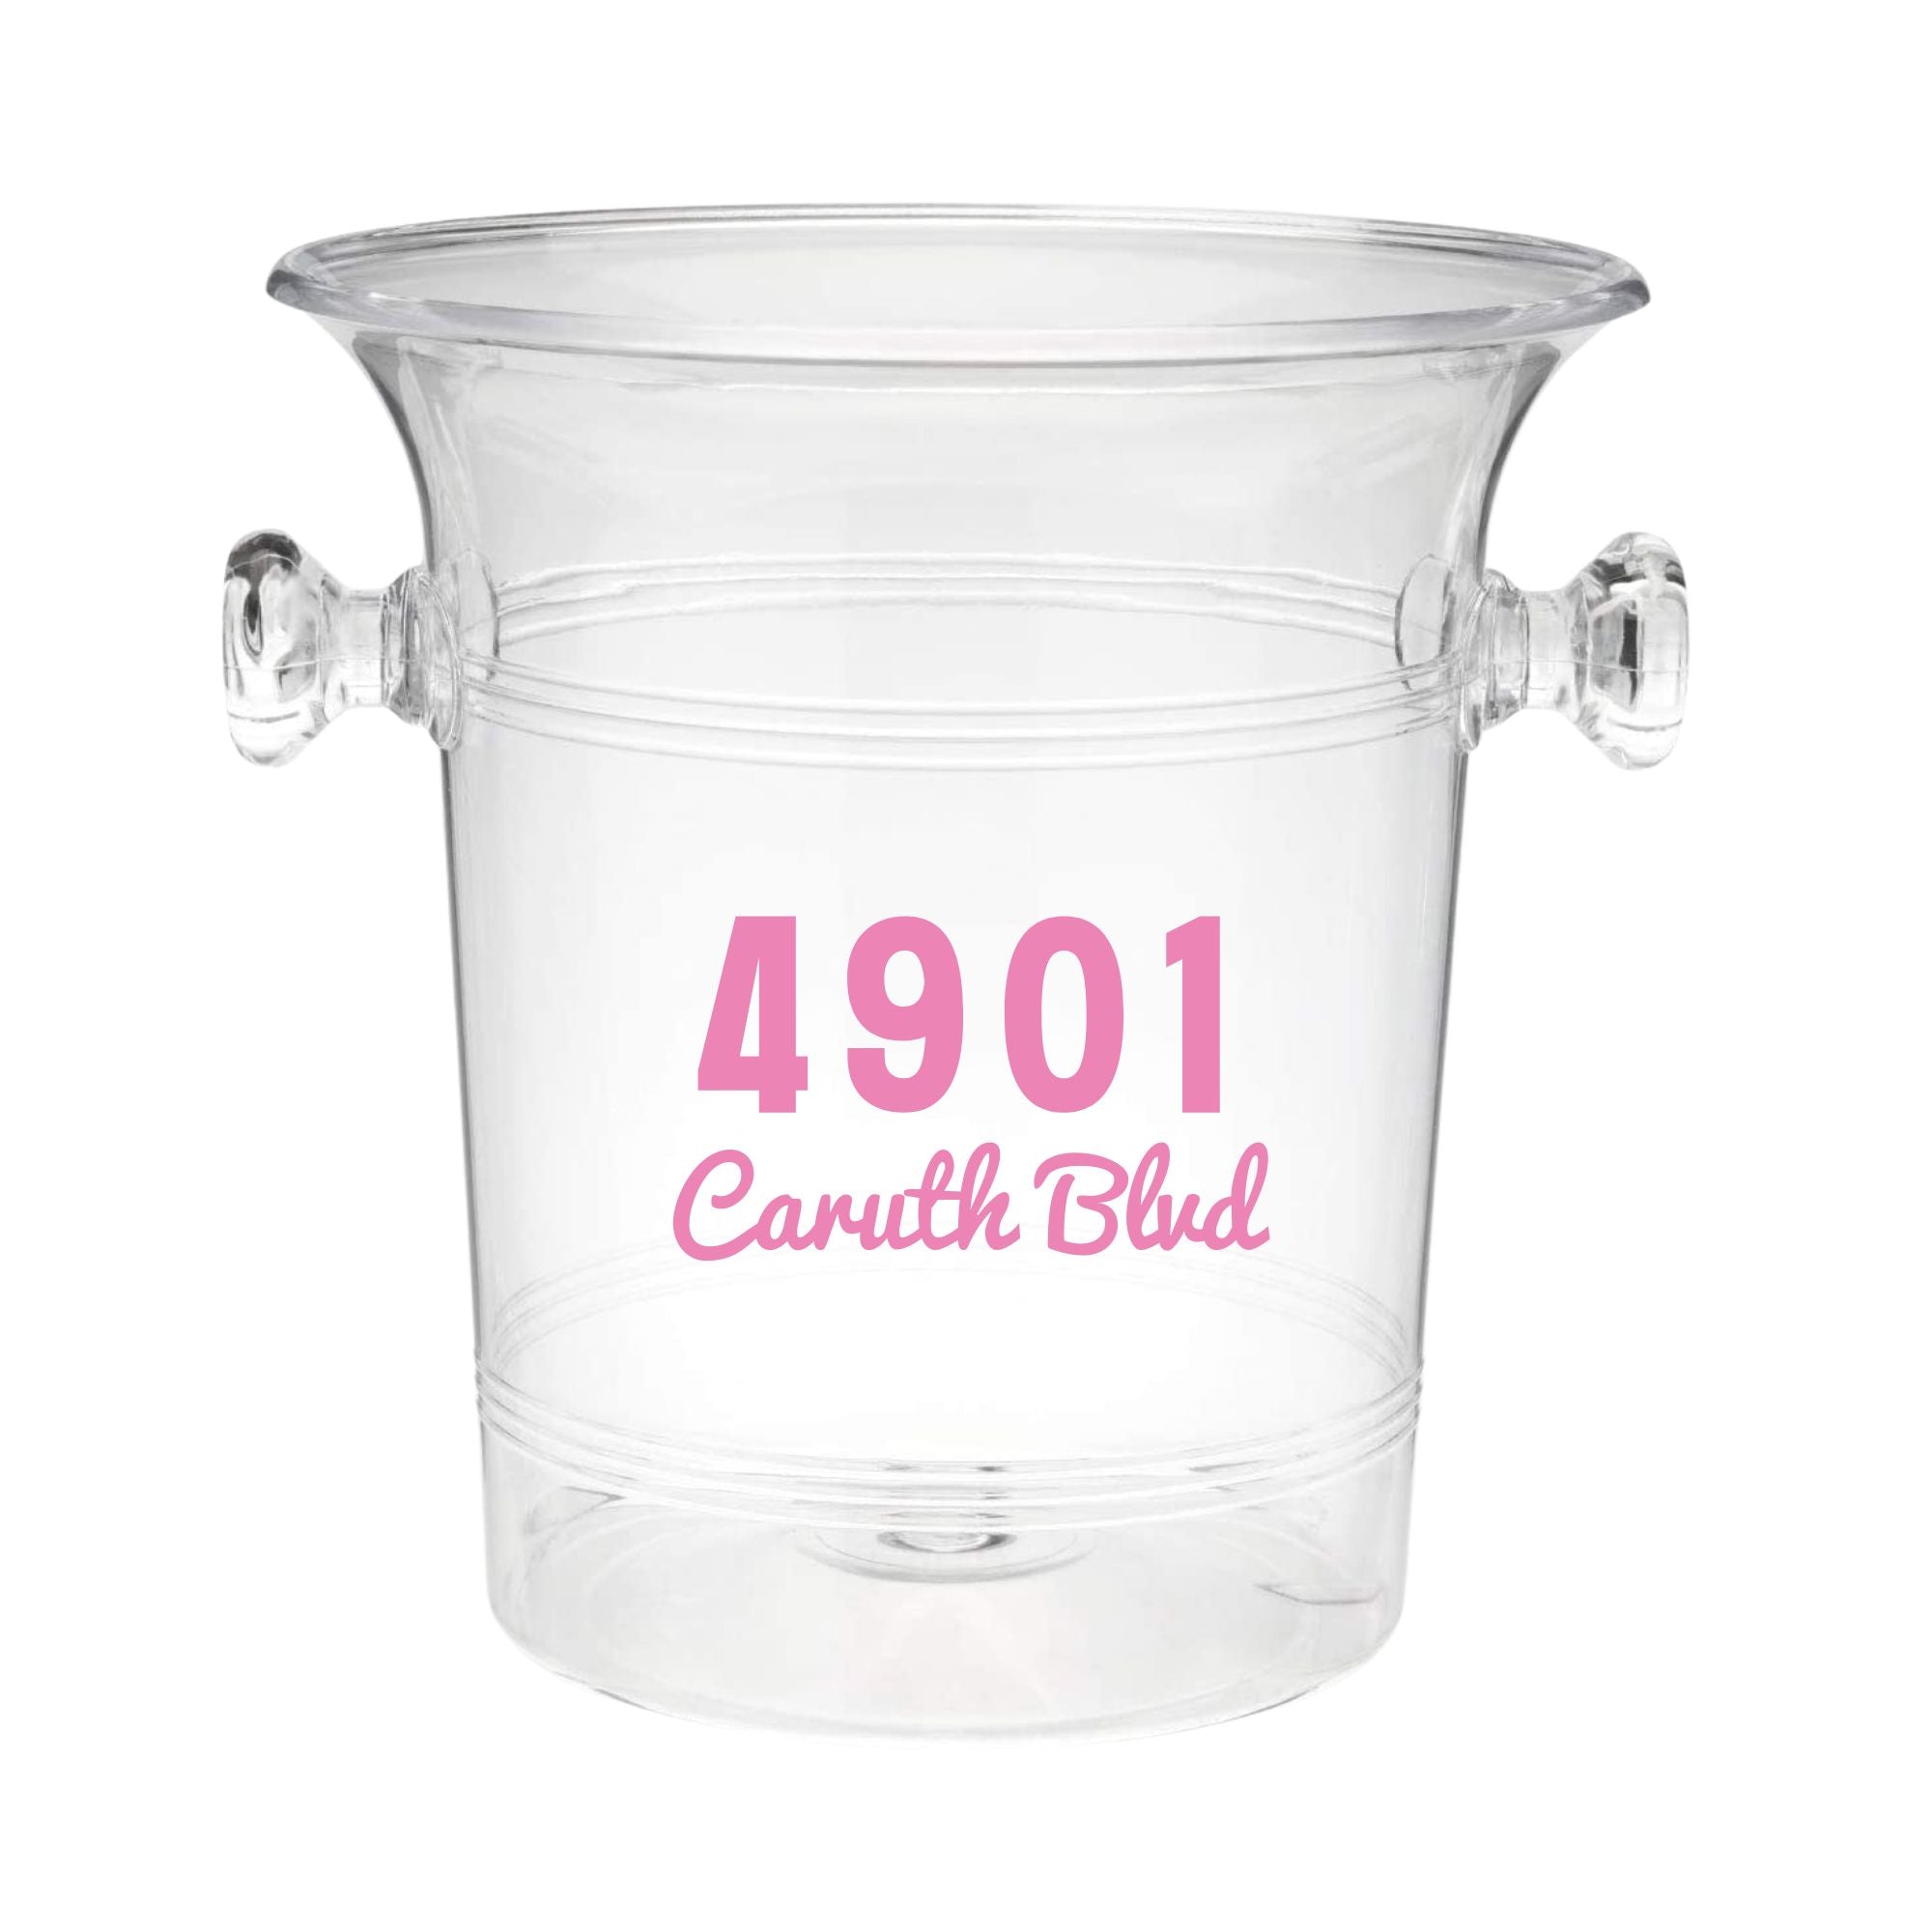 A clear acrylic ice bucket features a custom address on the front in pink lettering